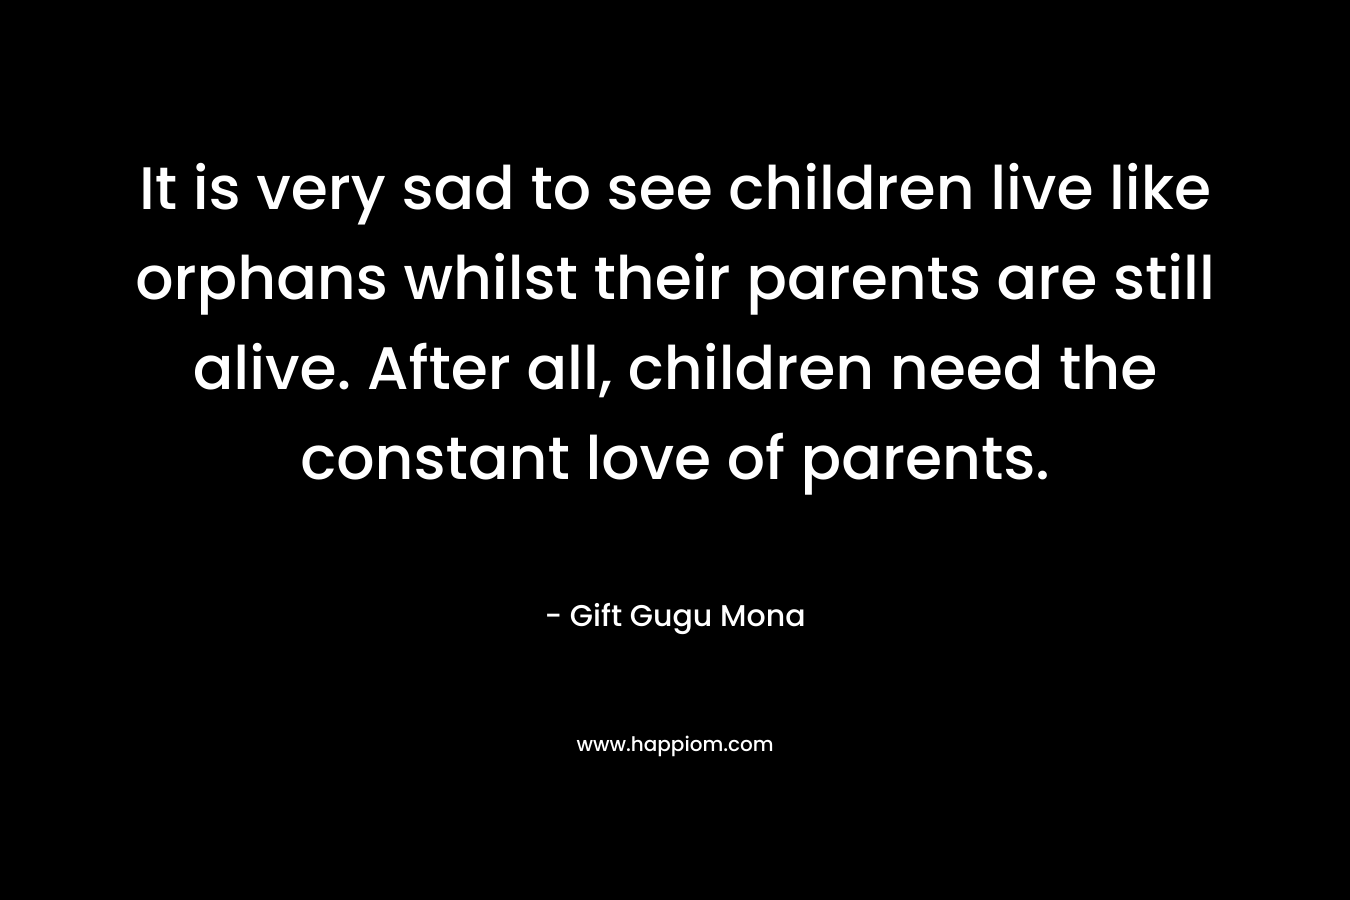 It is very sad to see children live like orphans whilst their parents are still alive. After all, children need the constant love of parents.